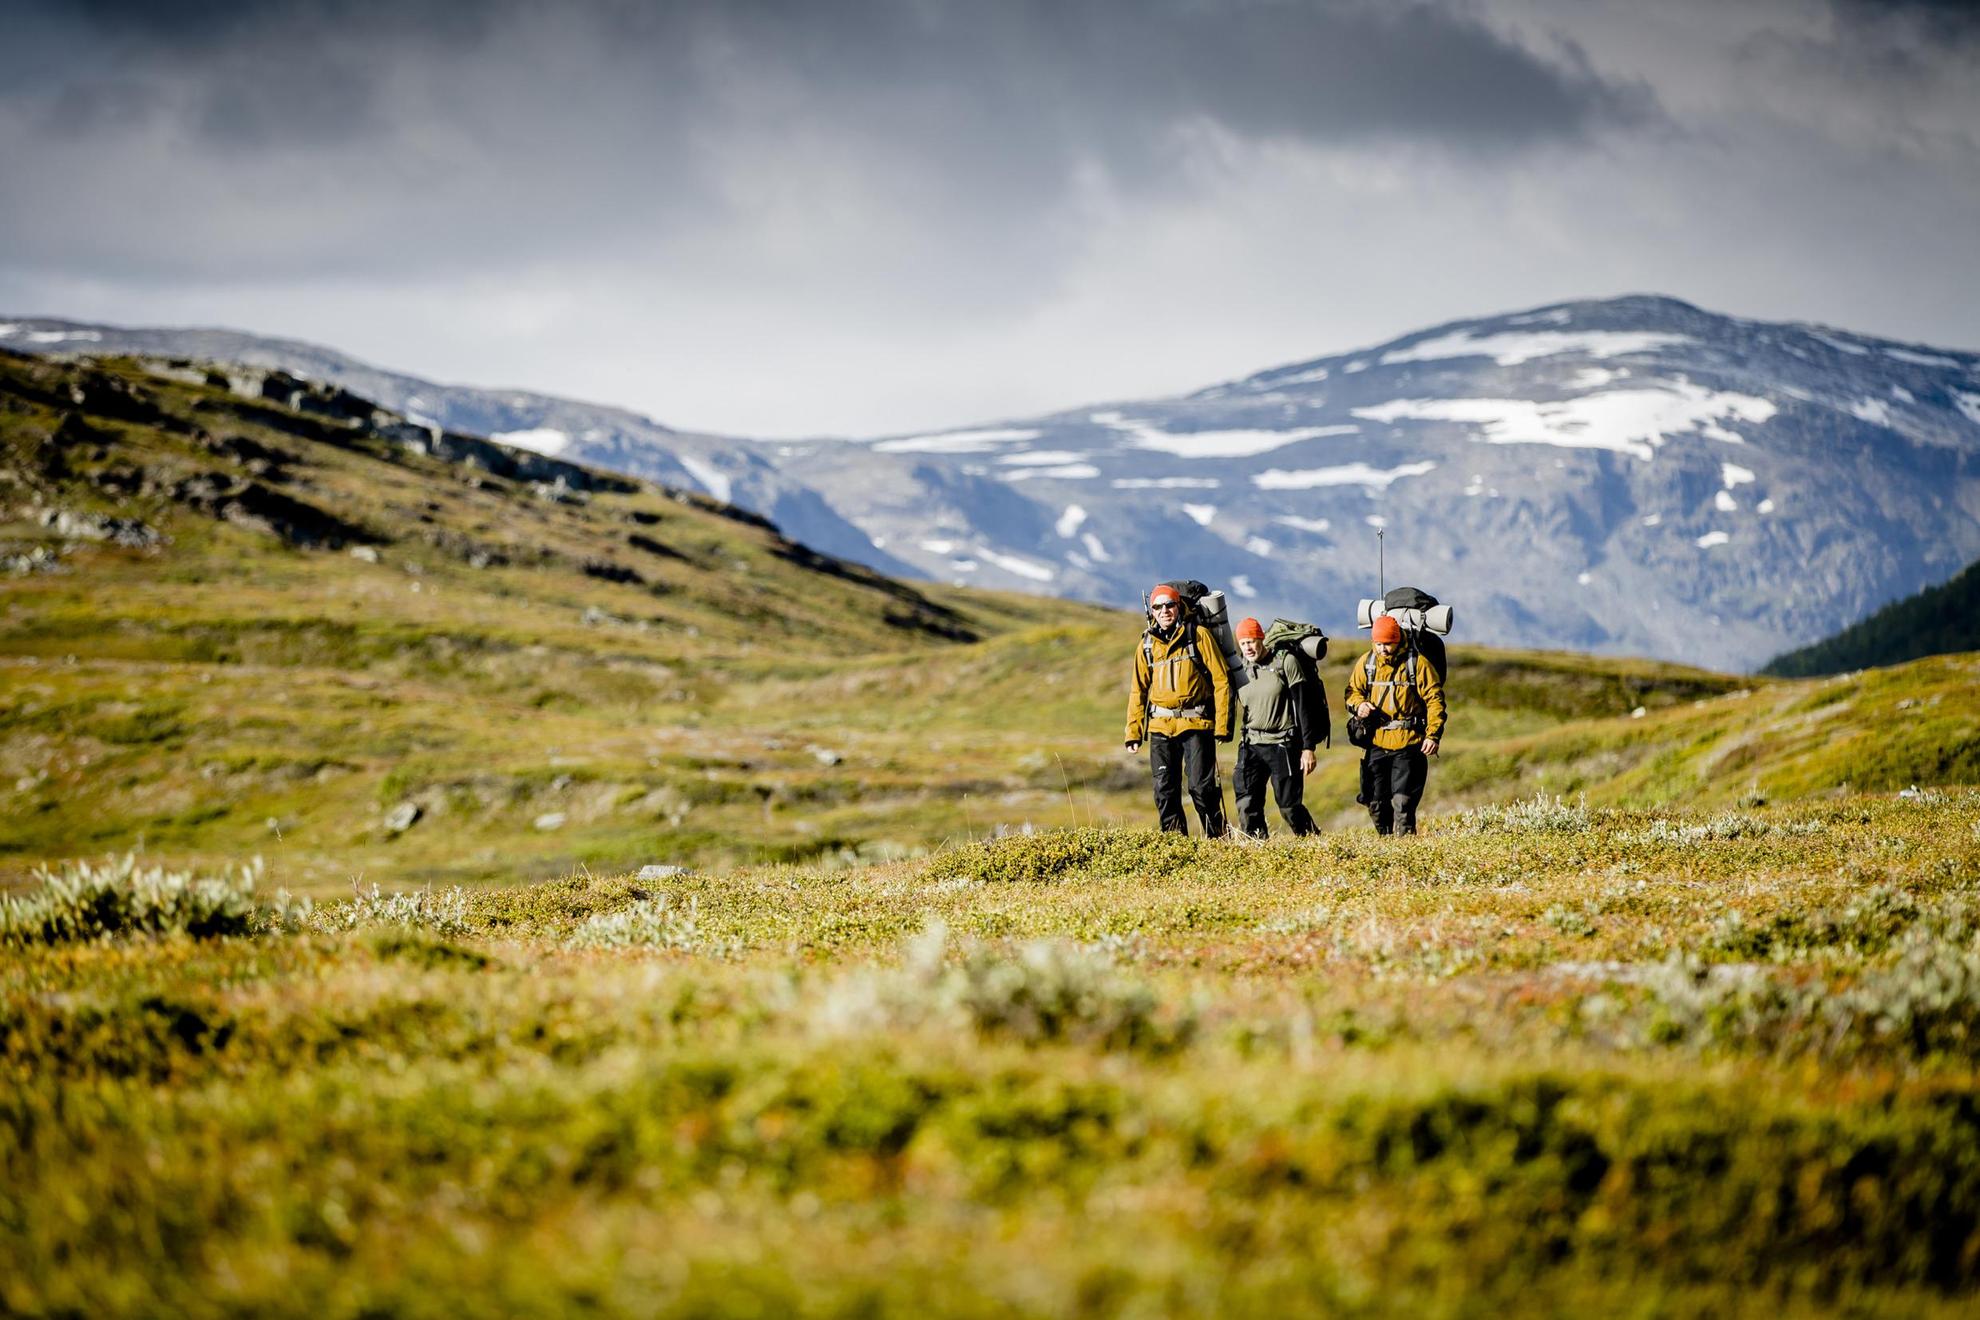 Three people with hiking gear and backpacks walking in the tundra.